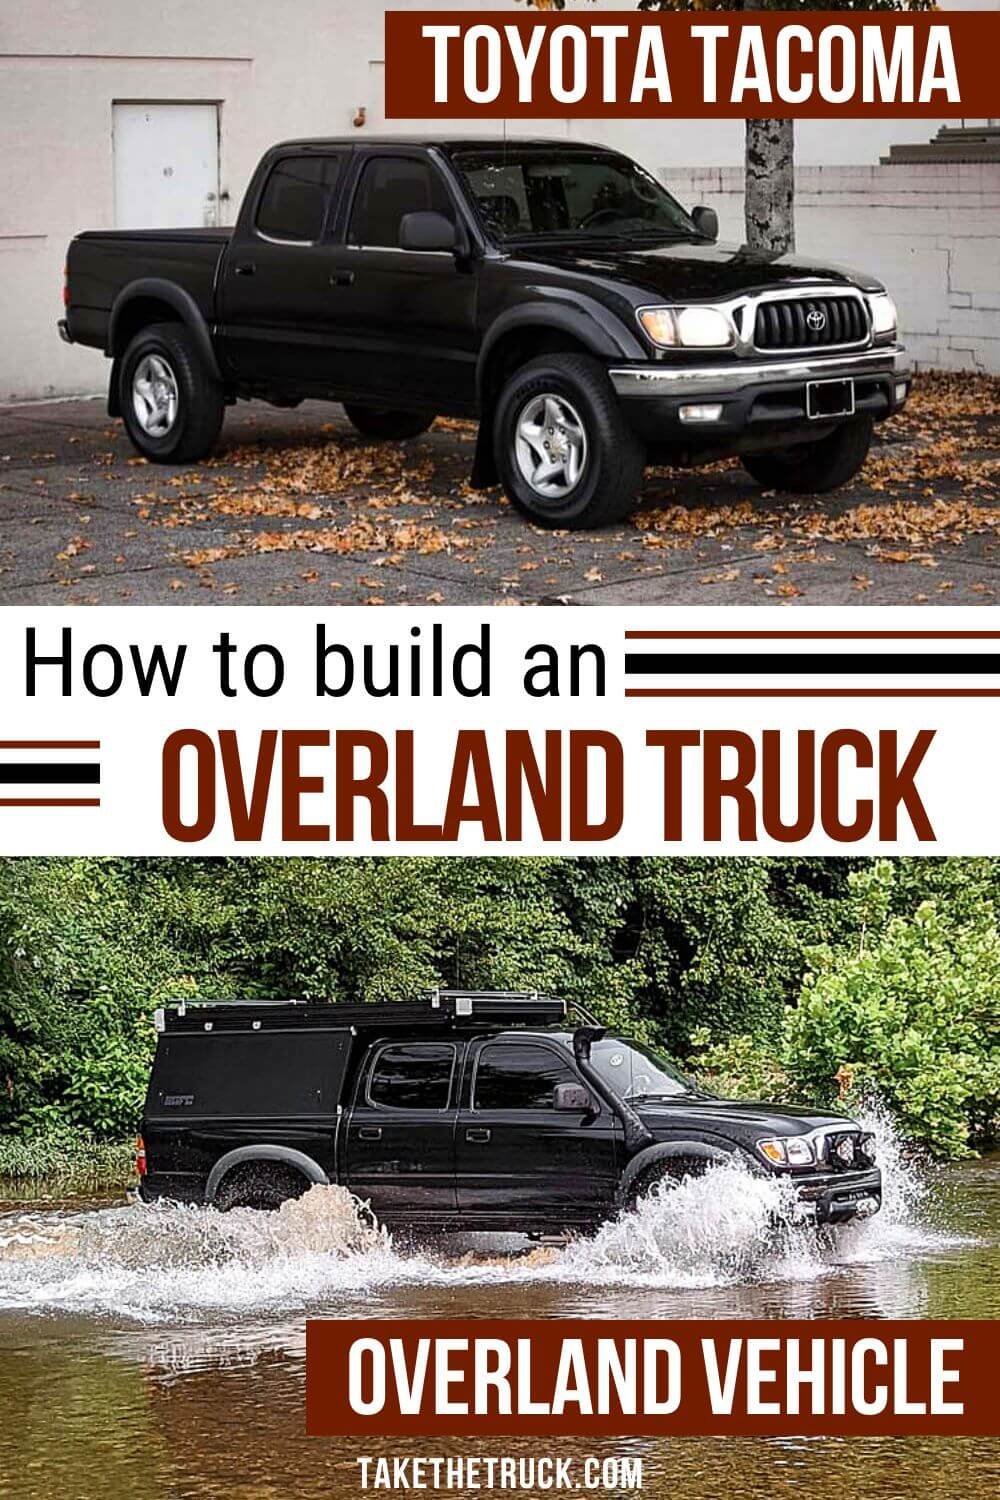  | first generation tacoma mods | first gen tacoma overland | first generation toyota tacoma | overlanding tacoma | overland toyota tacoma | toyota tacoma accessories | toyota tacoma 4x4